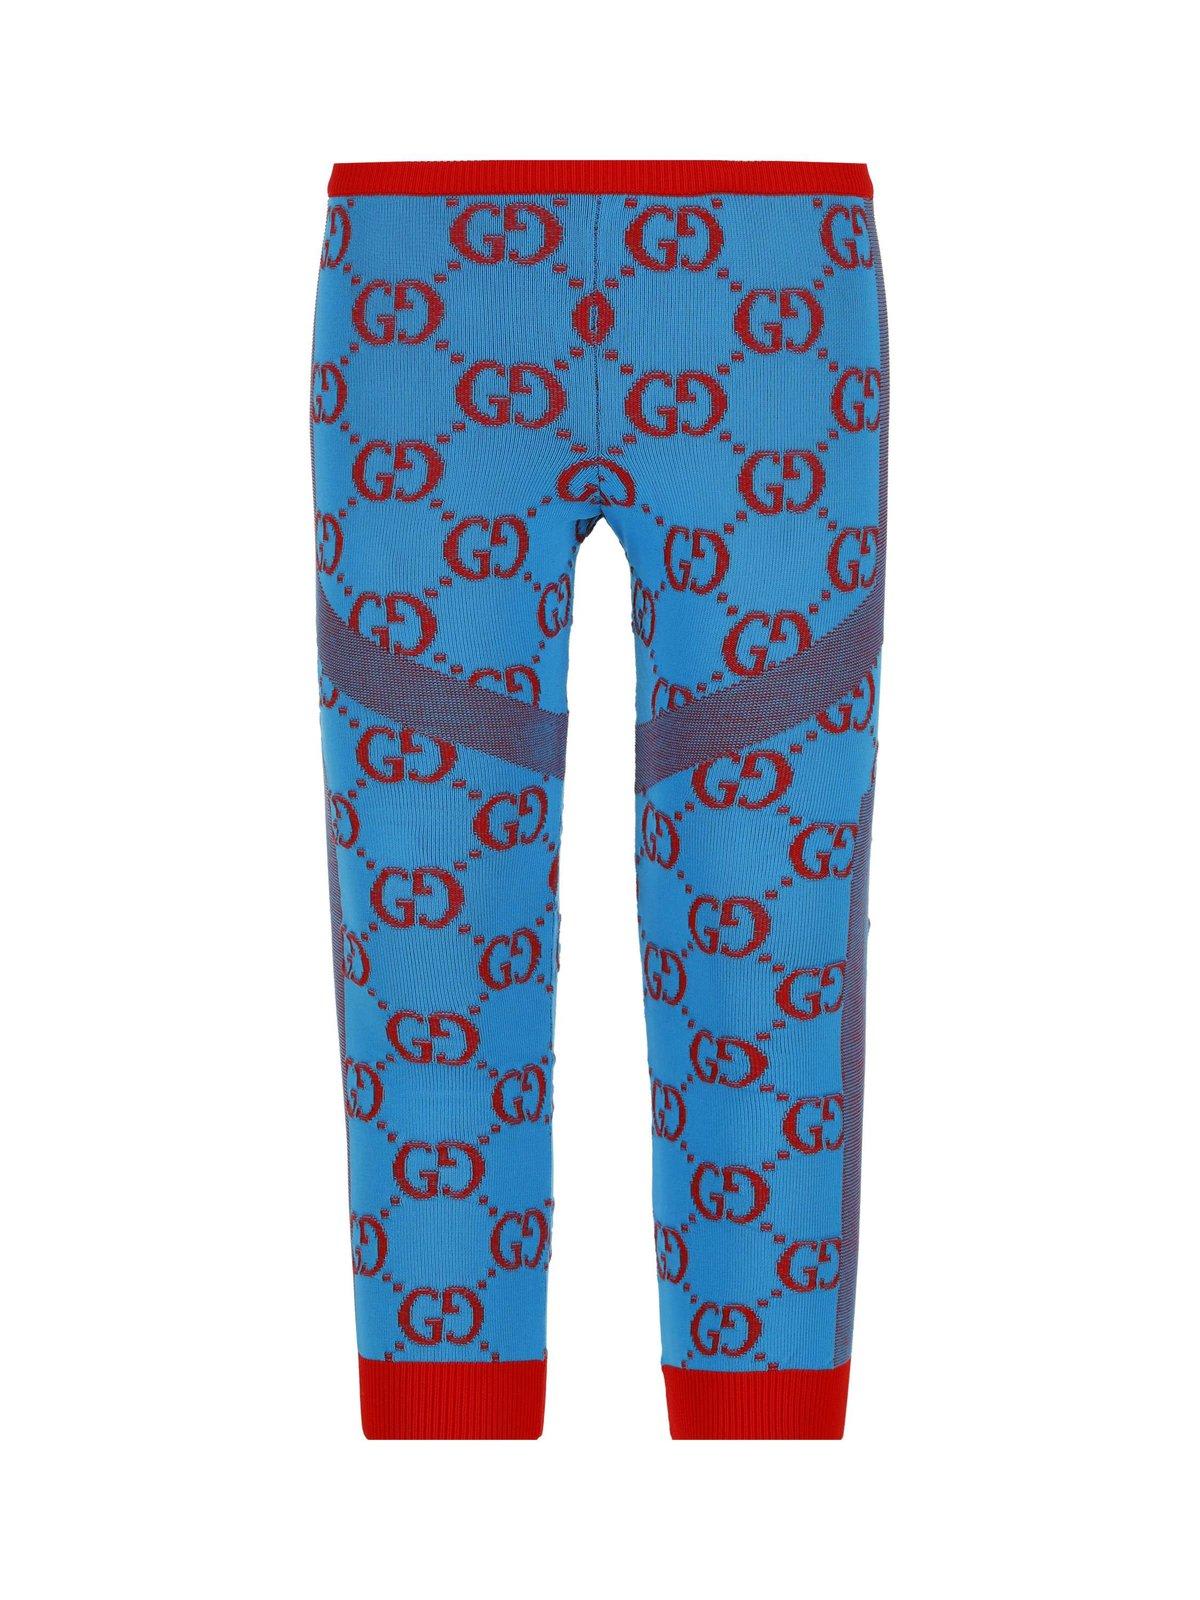 Gucci Kids' All-over Patterned Leggings